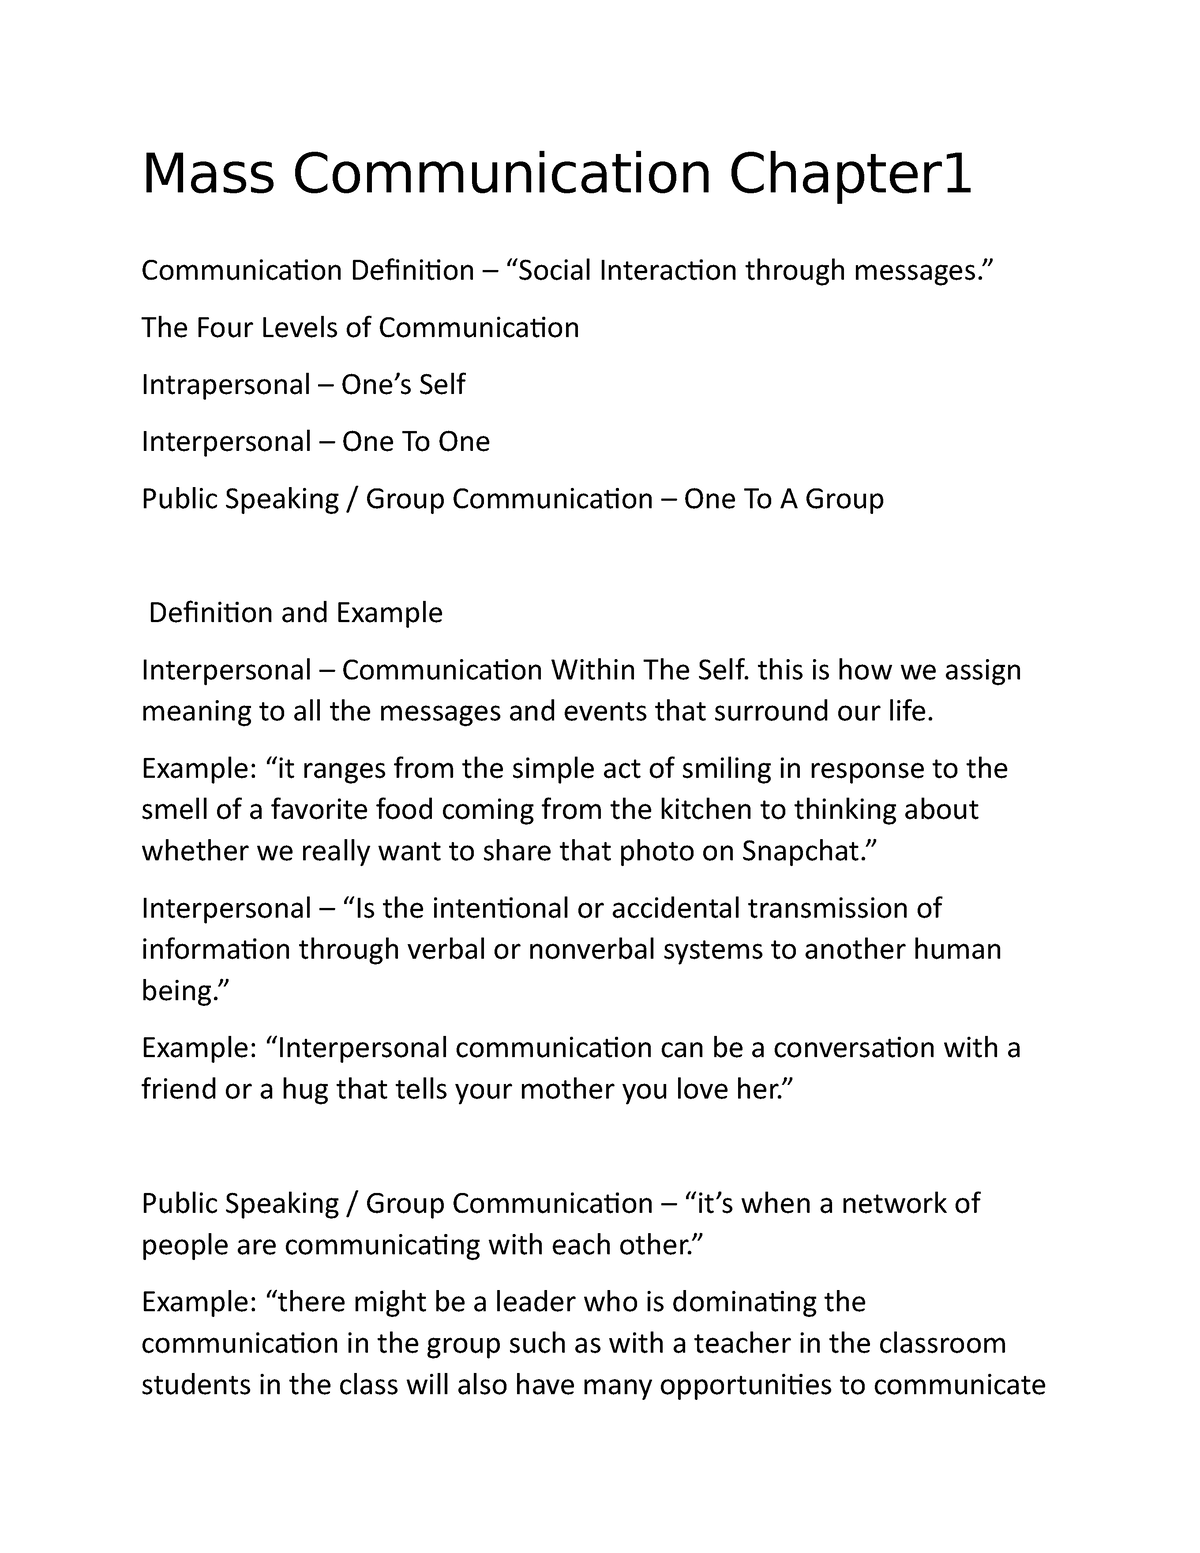 research questions for mass communication